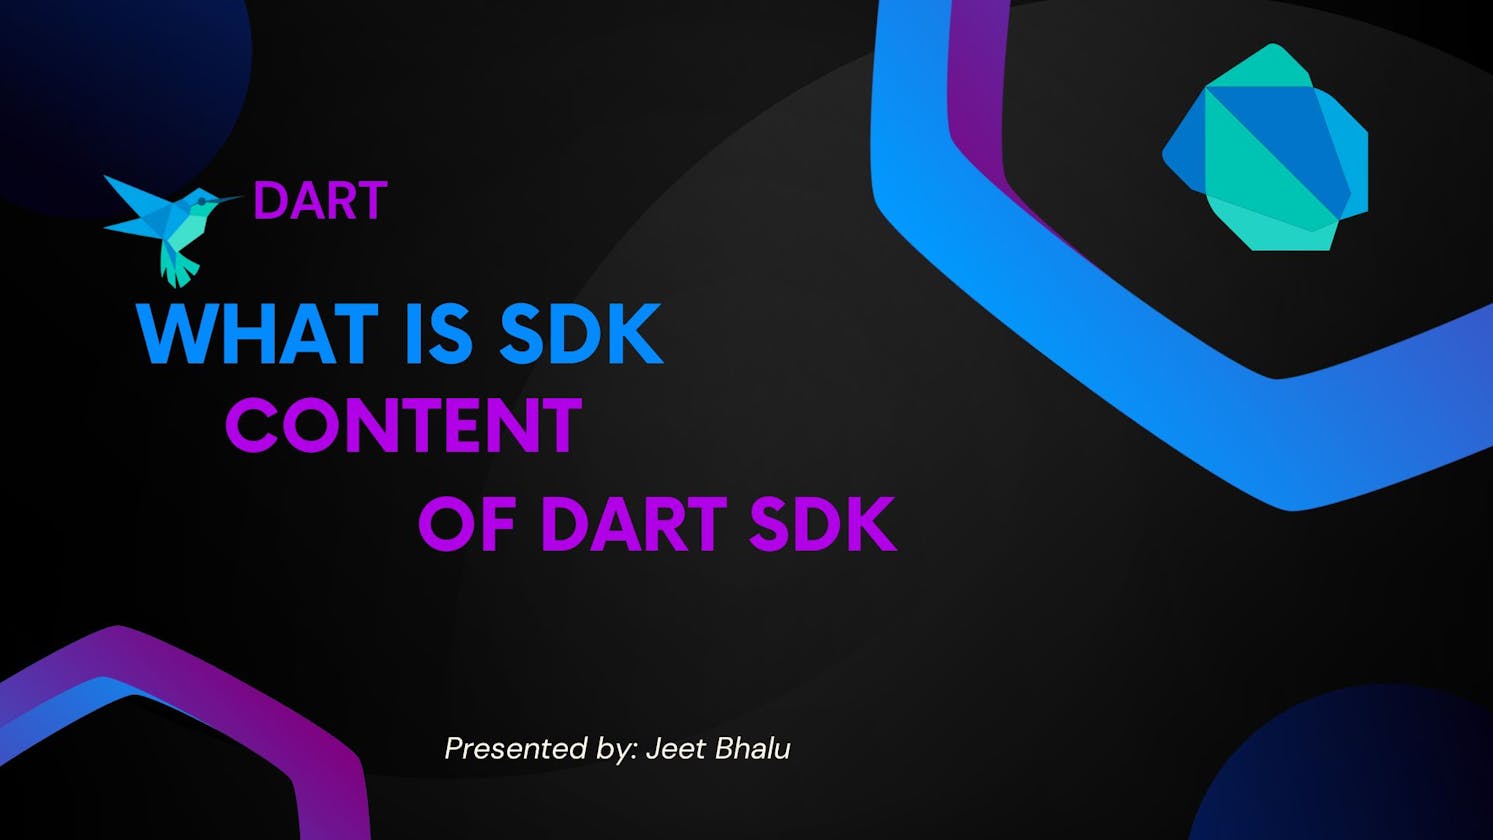 What is Sdk?